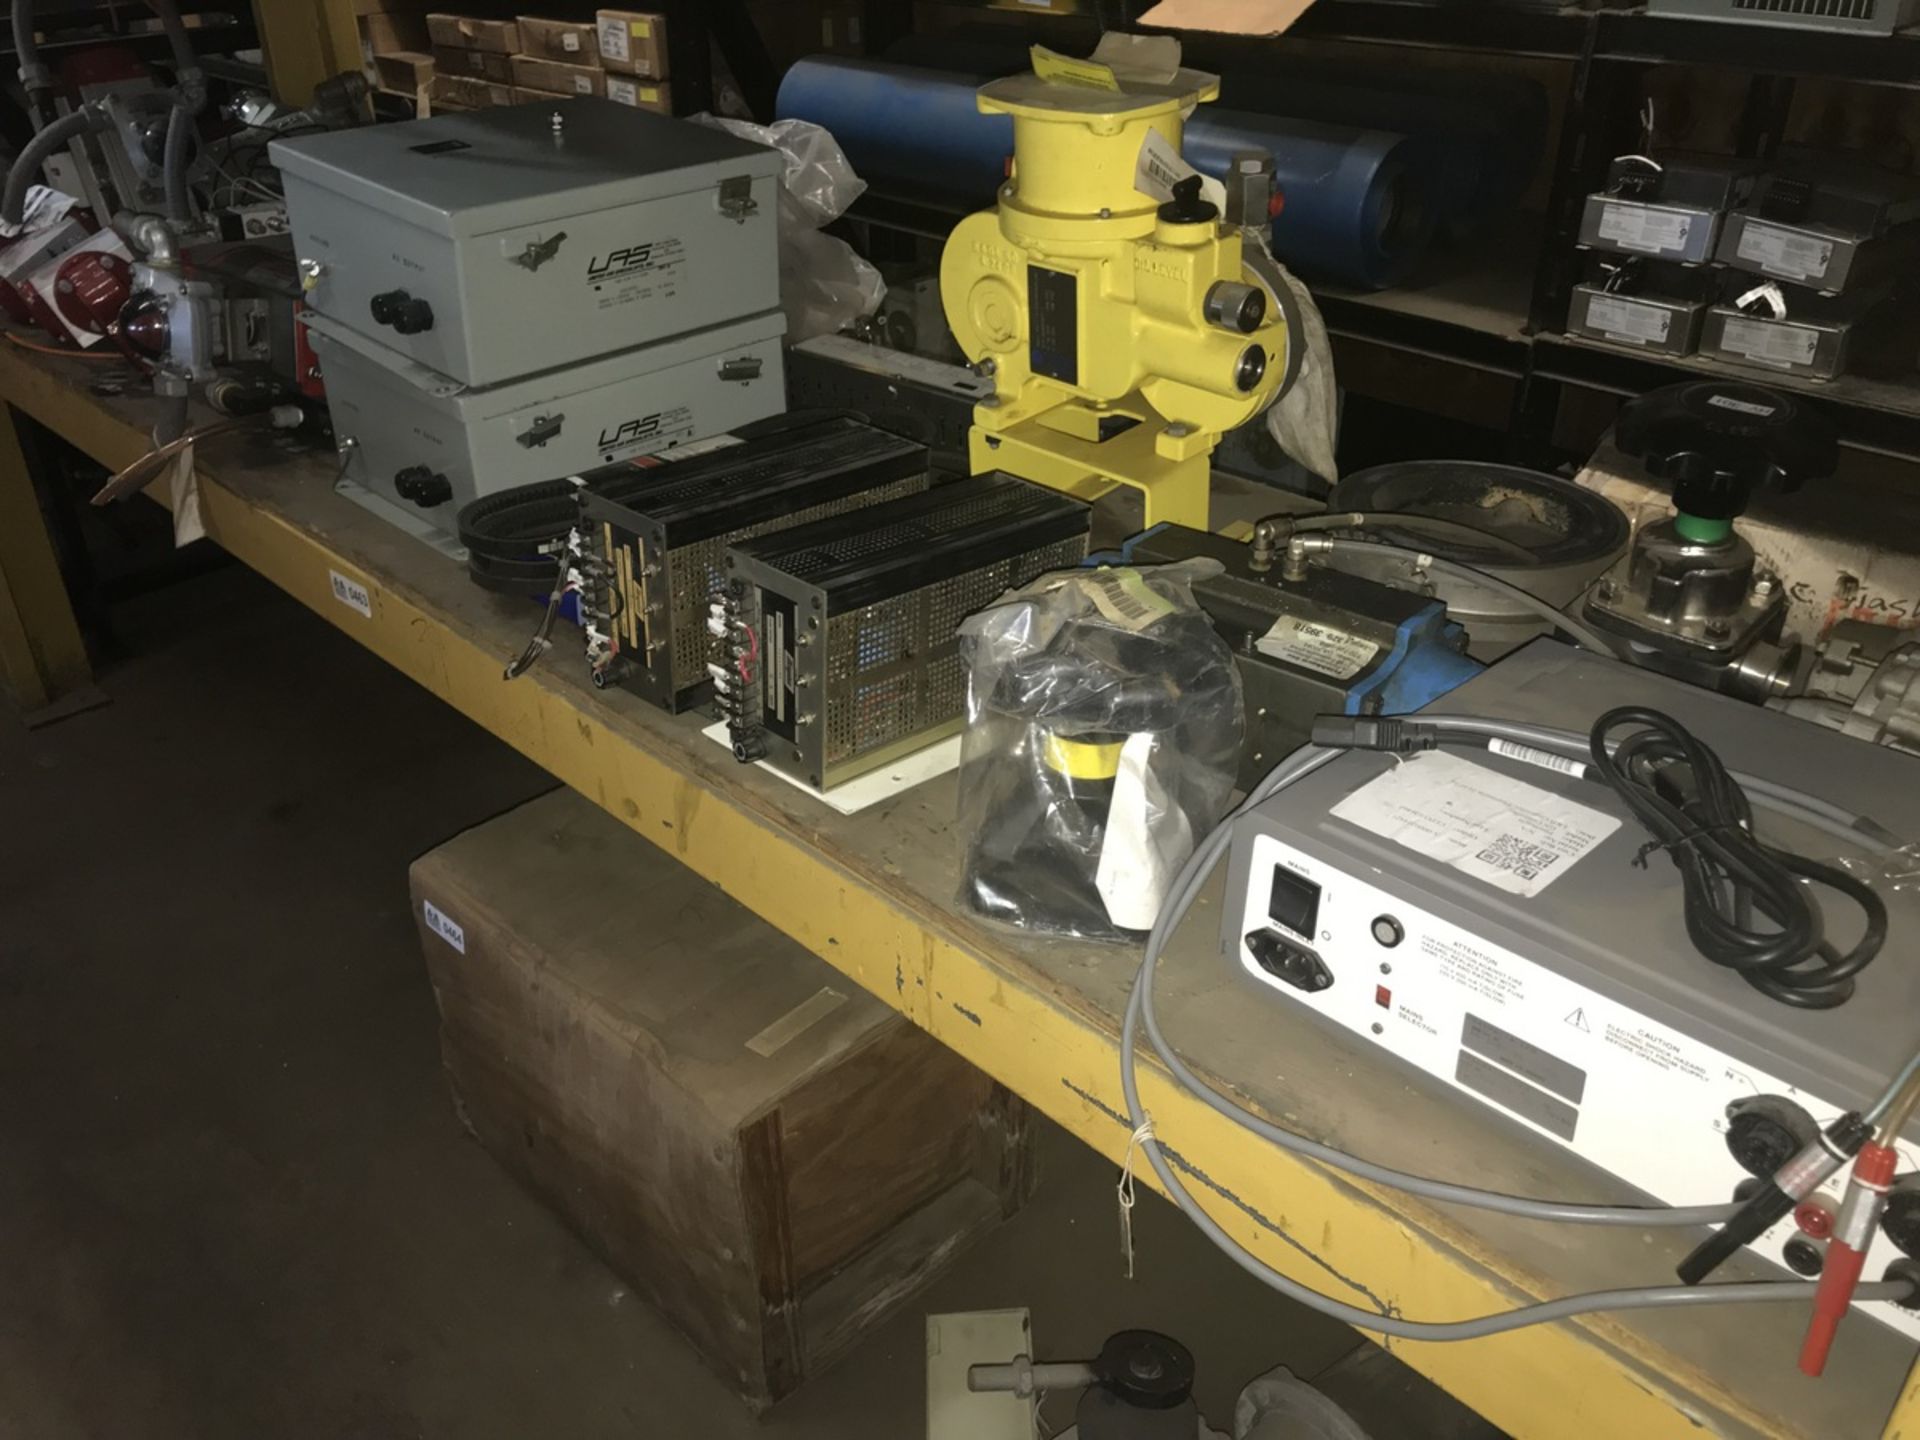 Contents of Shelf including Valves and Actuators, Control Boxes, Power Supplies, Pumps and